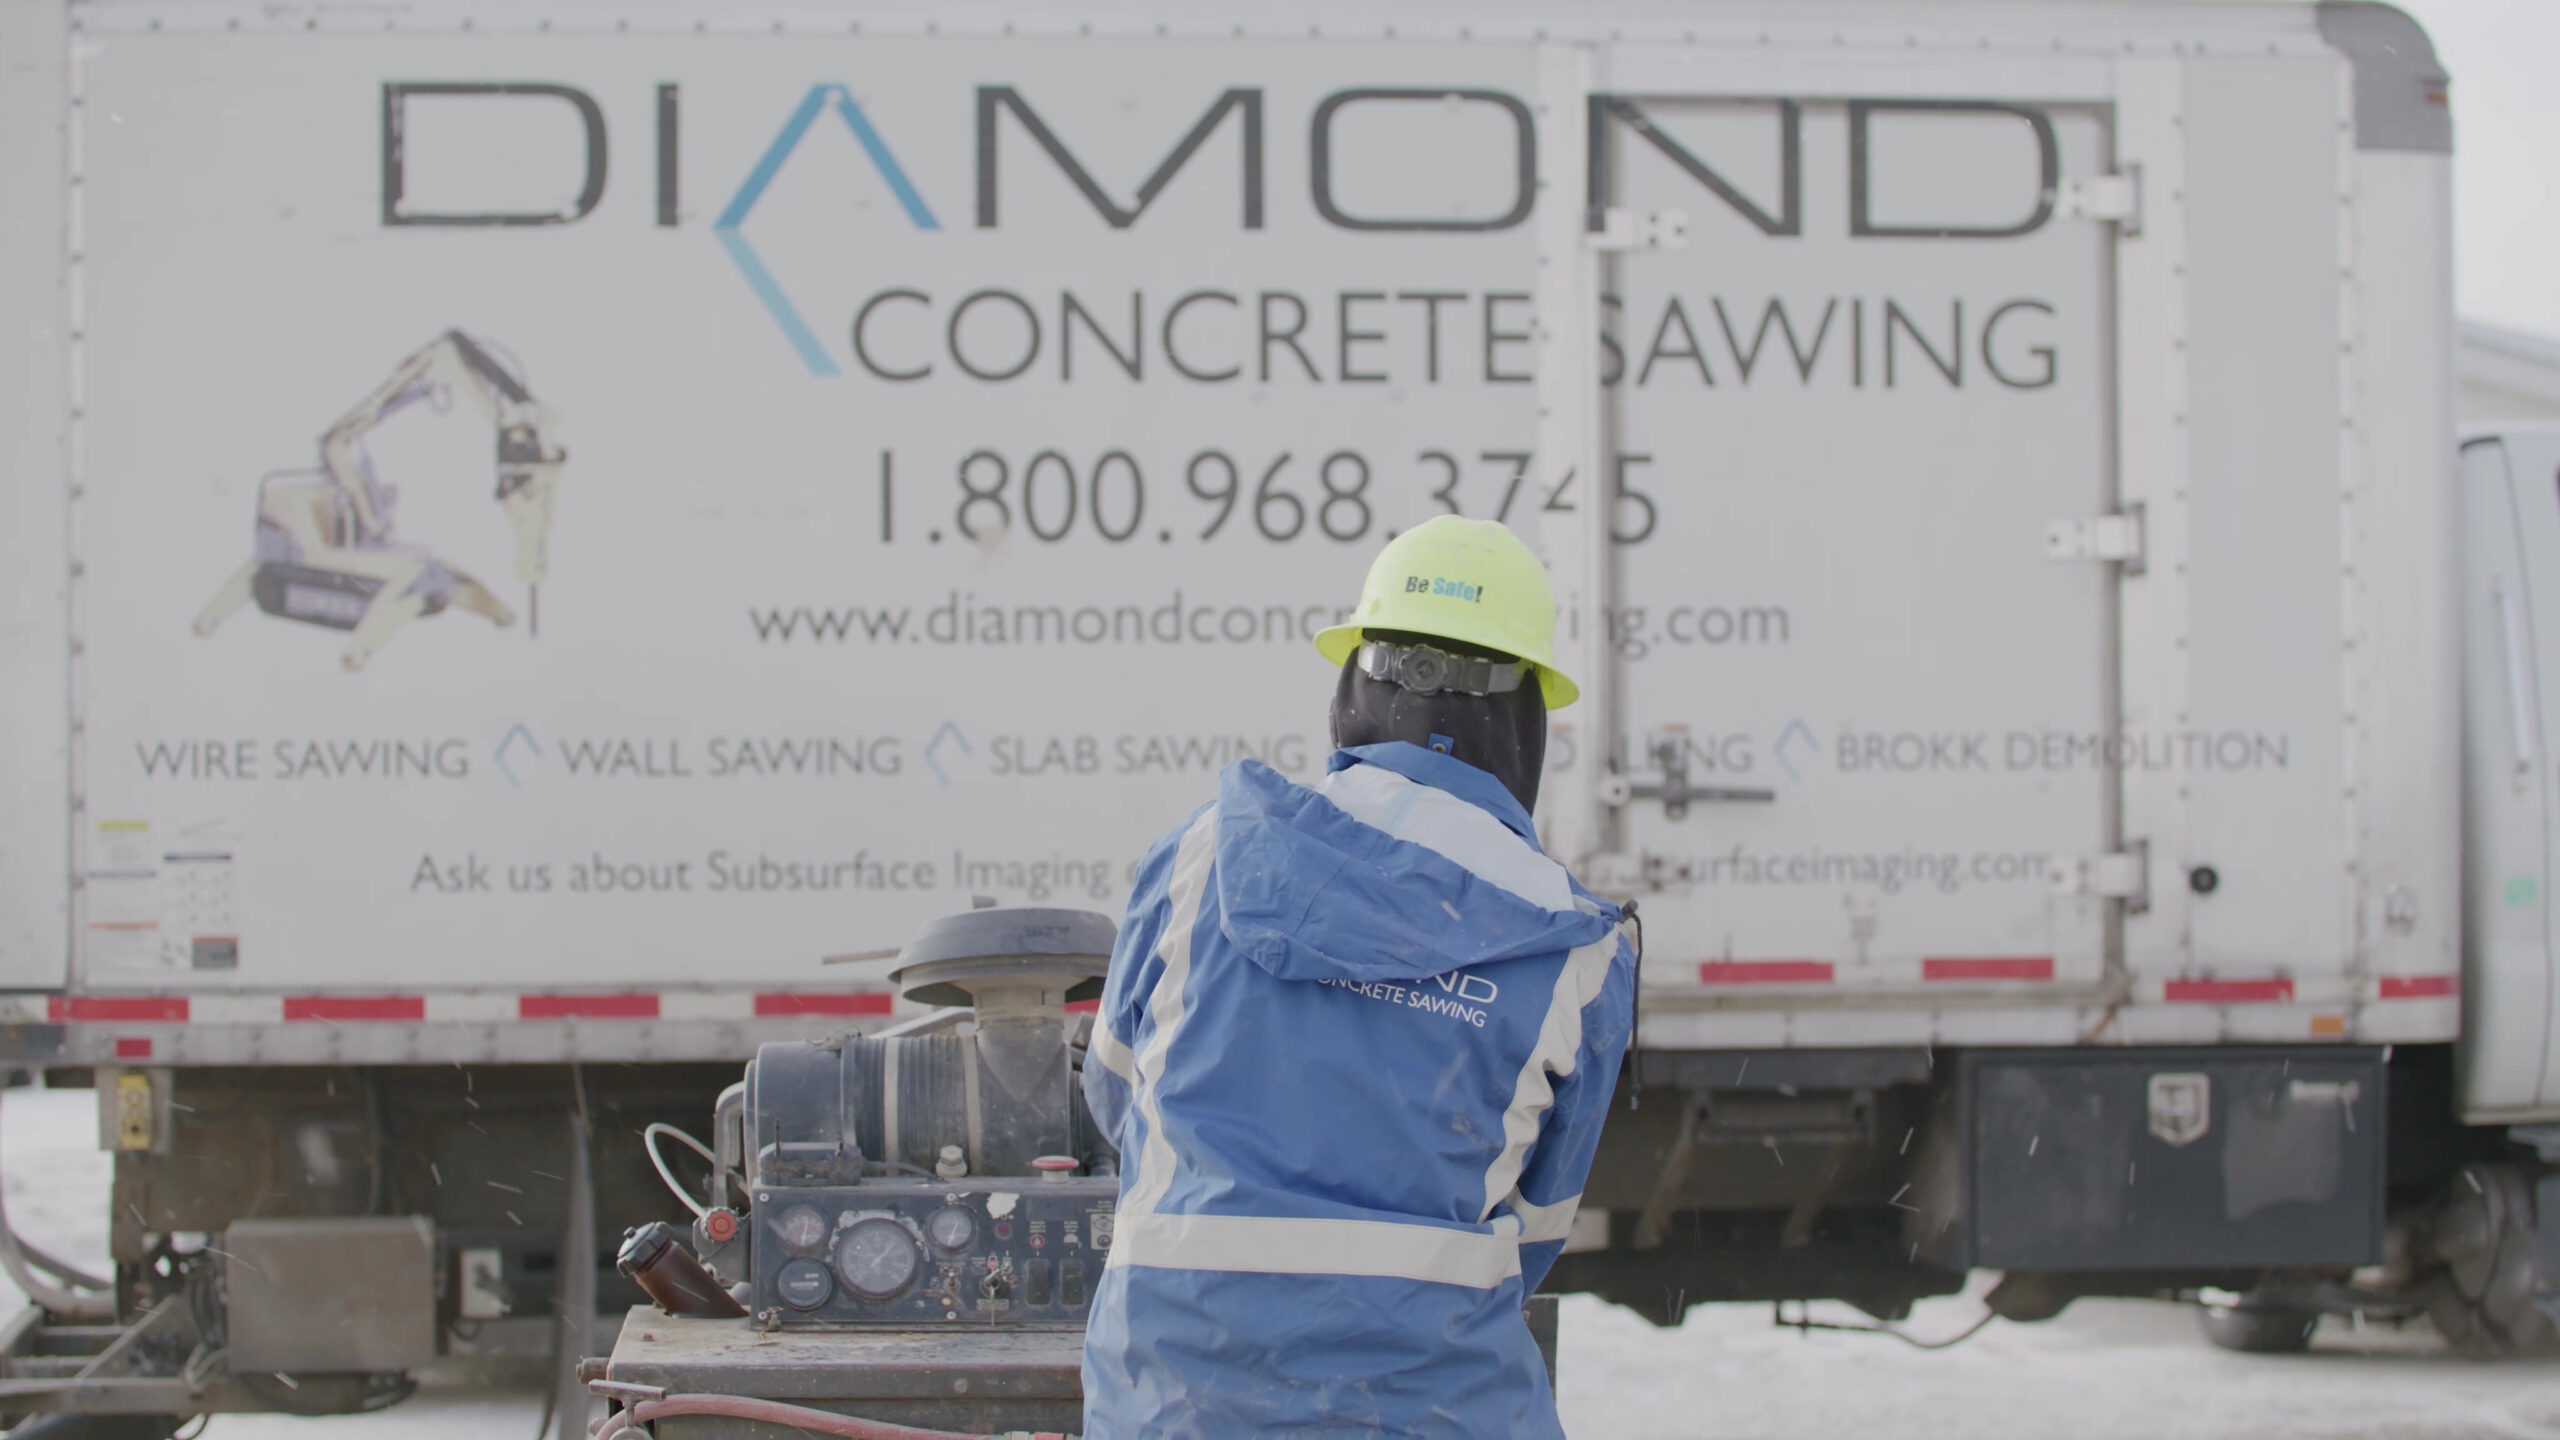 Worker in safety gear in front of a truck with 'Diamond Concrete Sawing' branding.